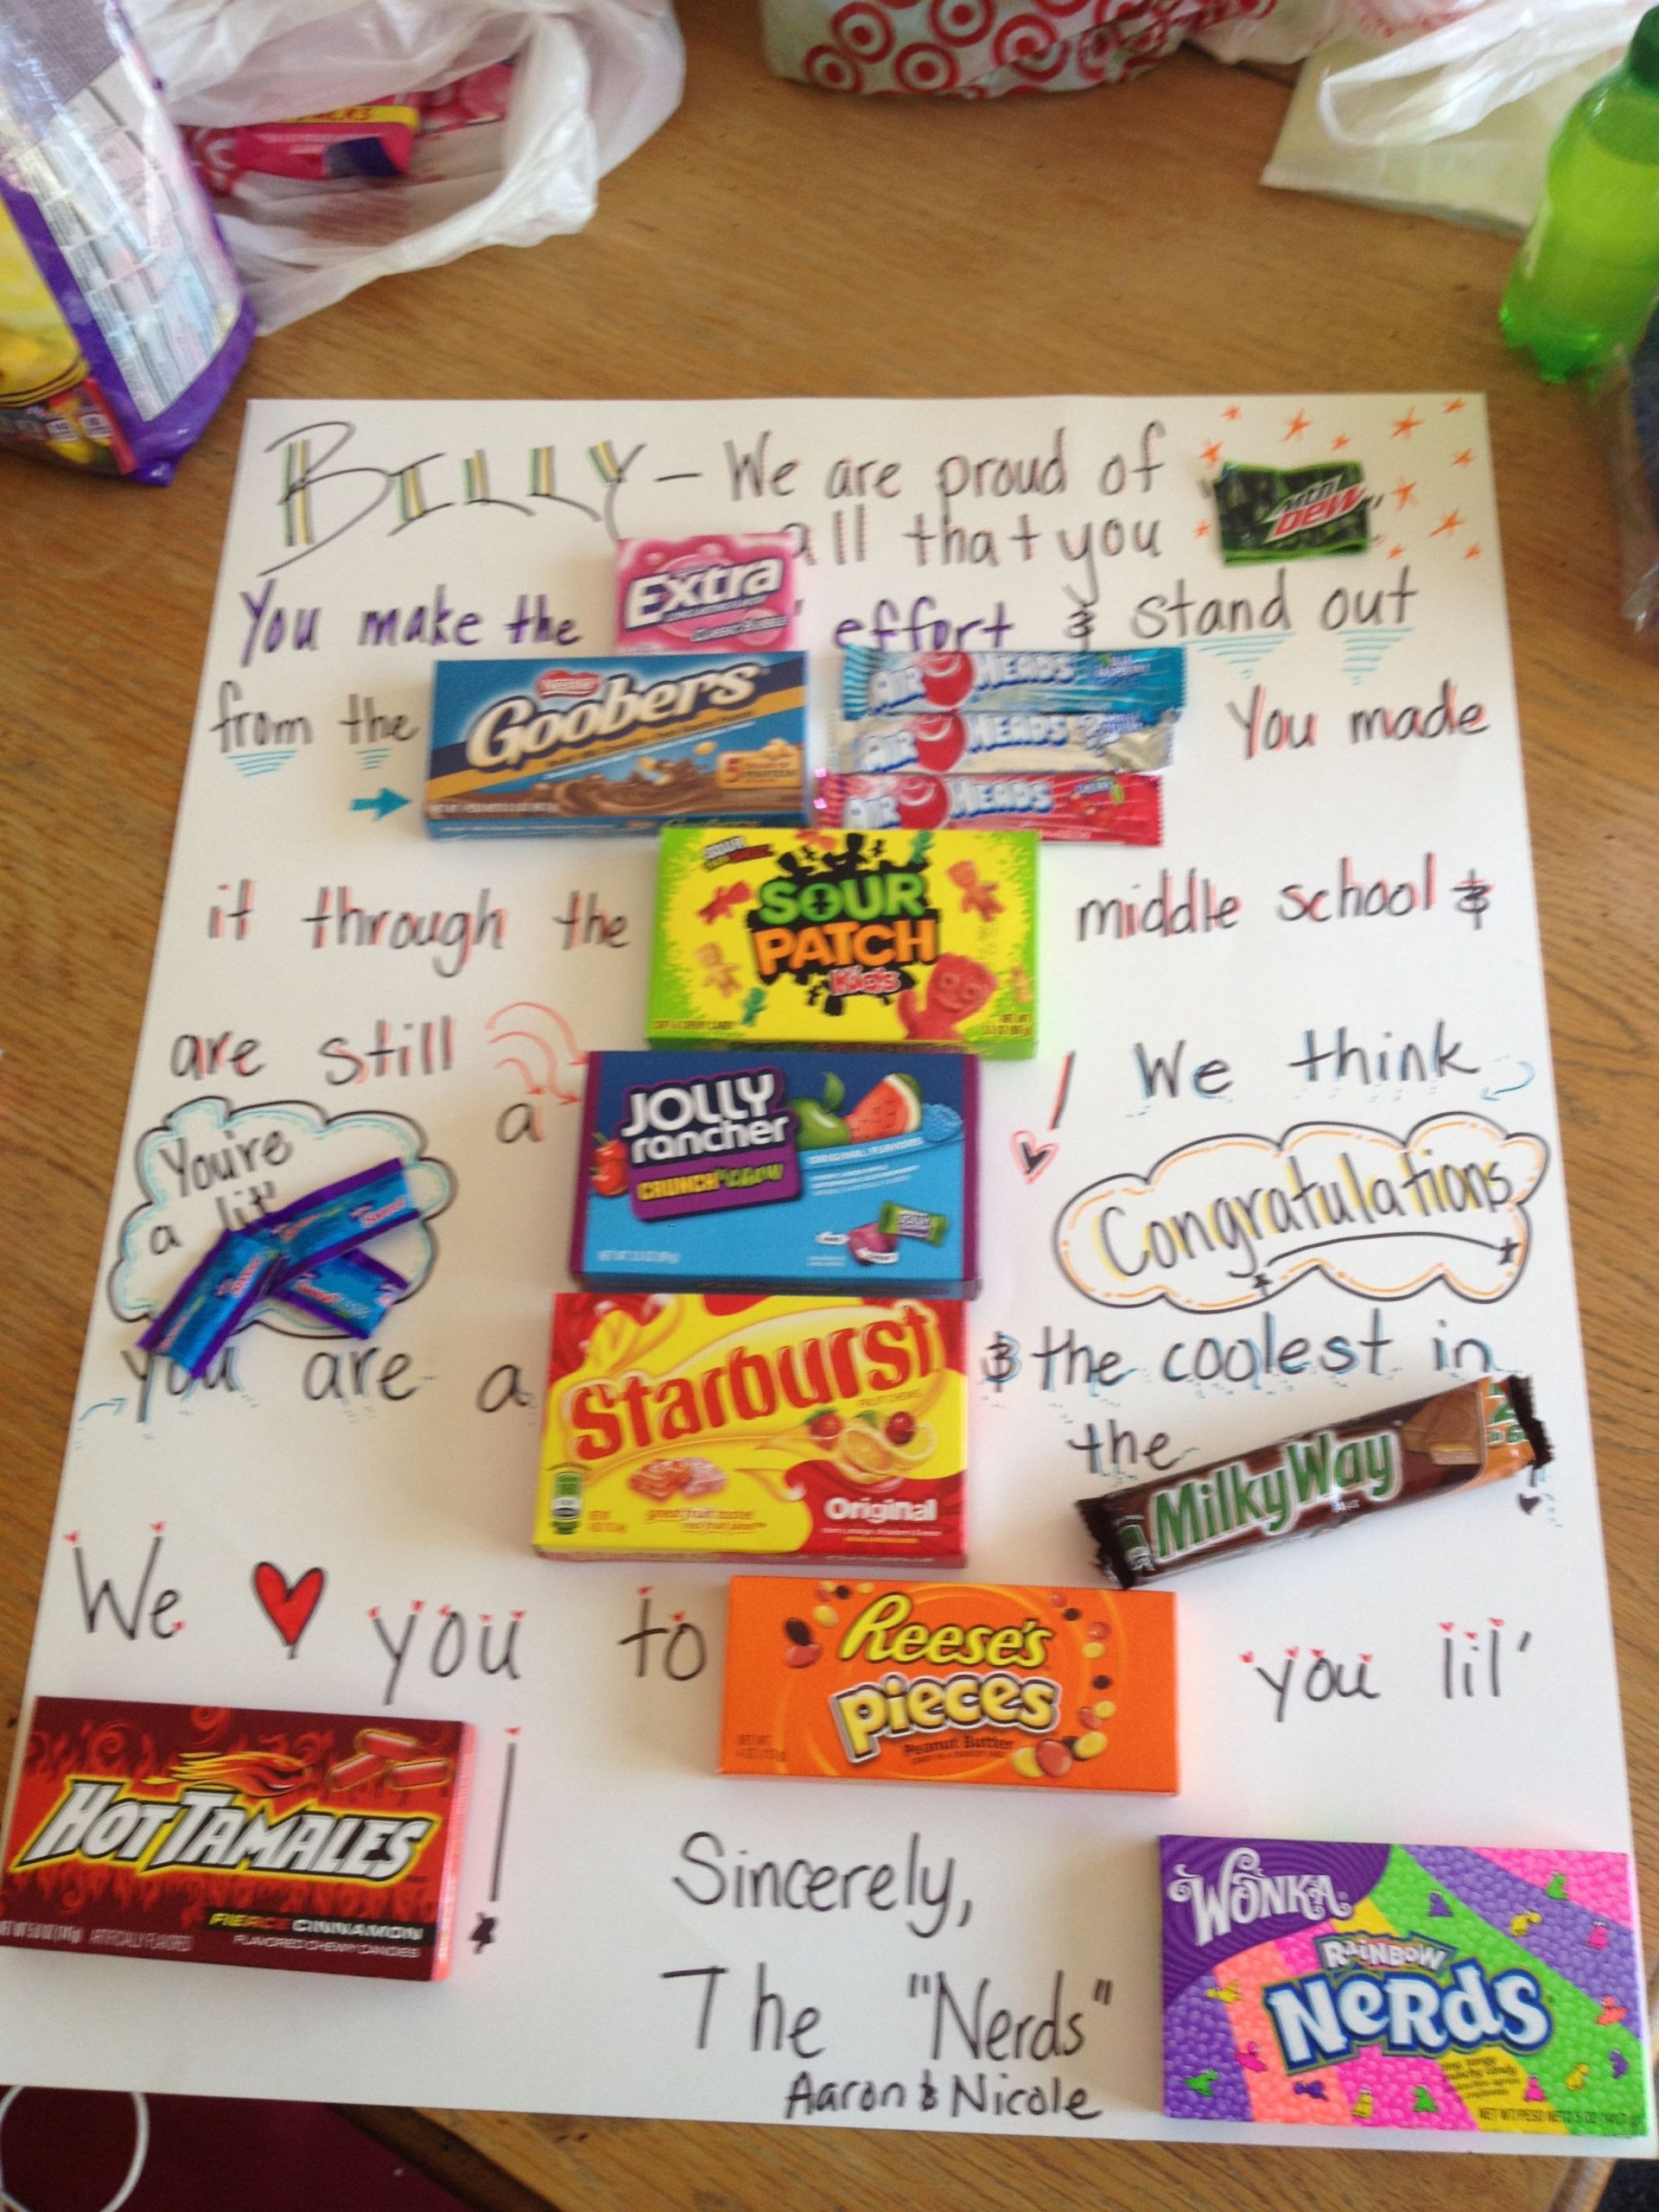 5Th Grade Graduation Gift Ideas For Boys
 A candy card for a boy promoting graduating middle school